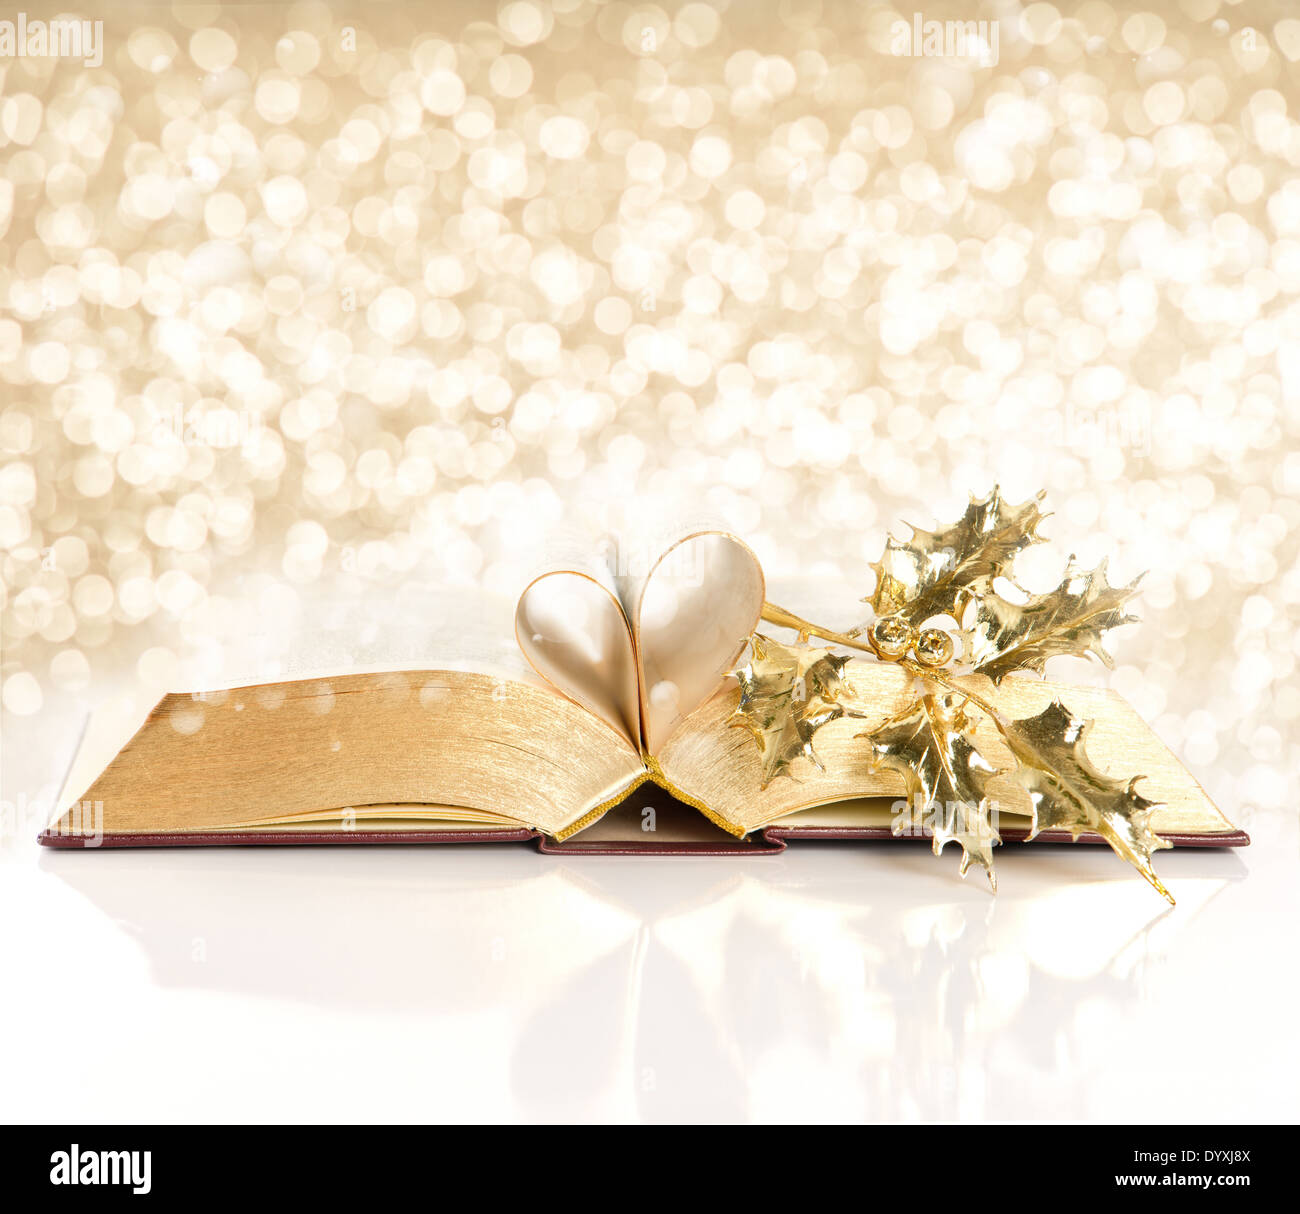 open vintage book with golden pages. bible with golden decoration over shiny lights background Stock Photo